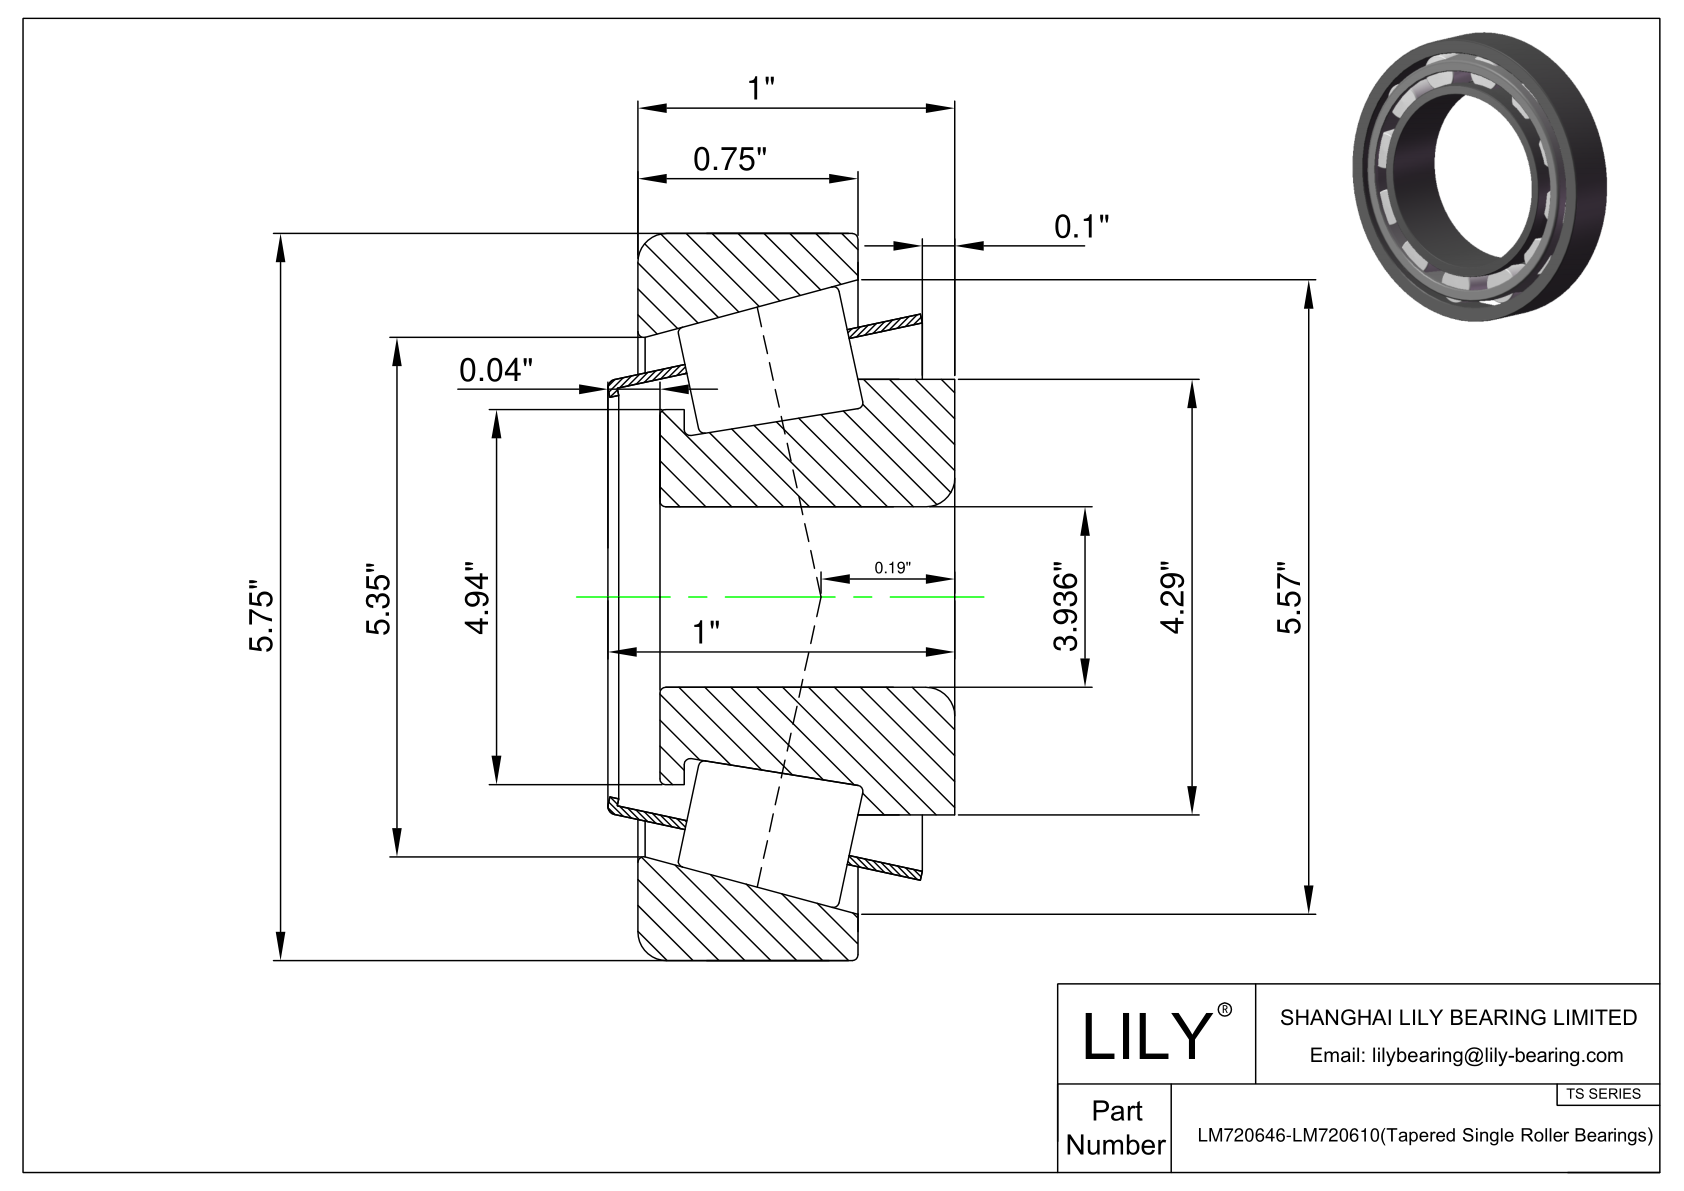 LM720646-LM720610 TS (Tapered Single Roller Bearings) (Imperial) cad drawing